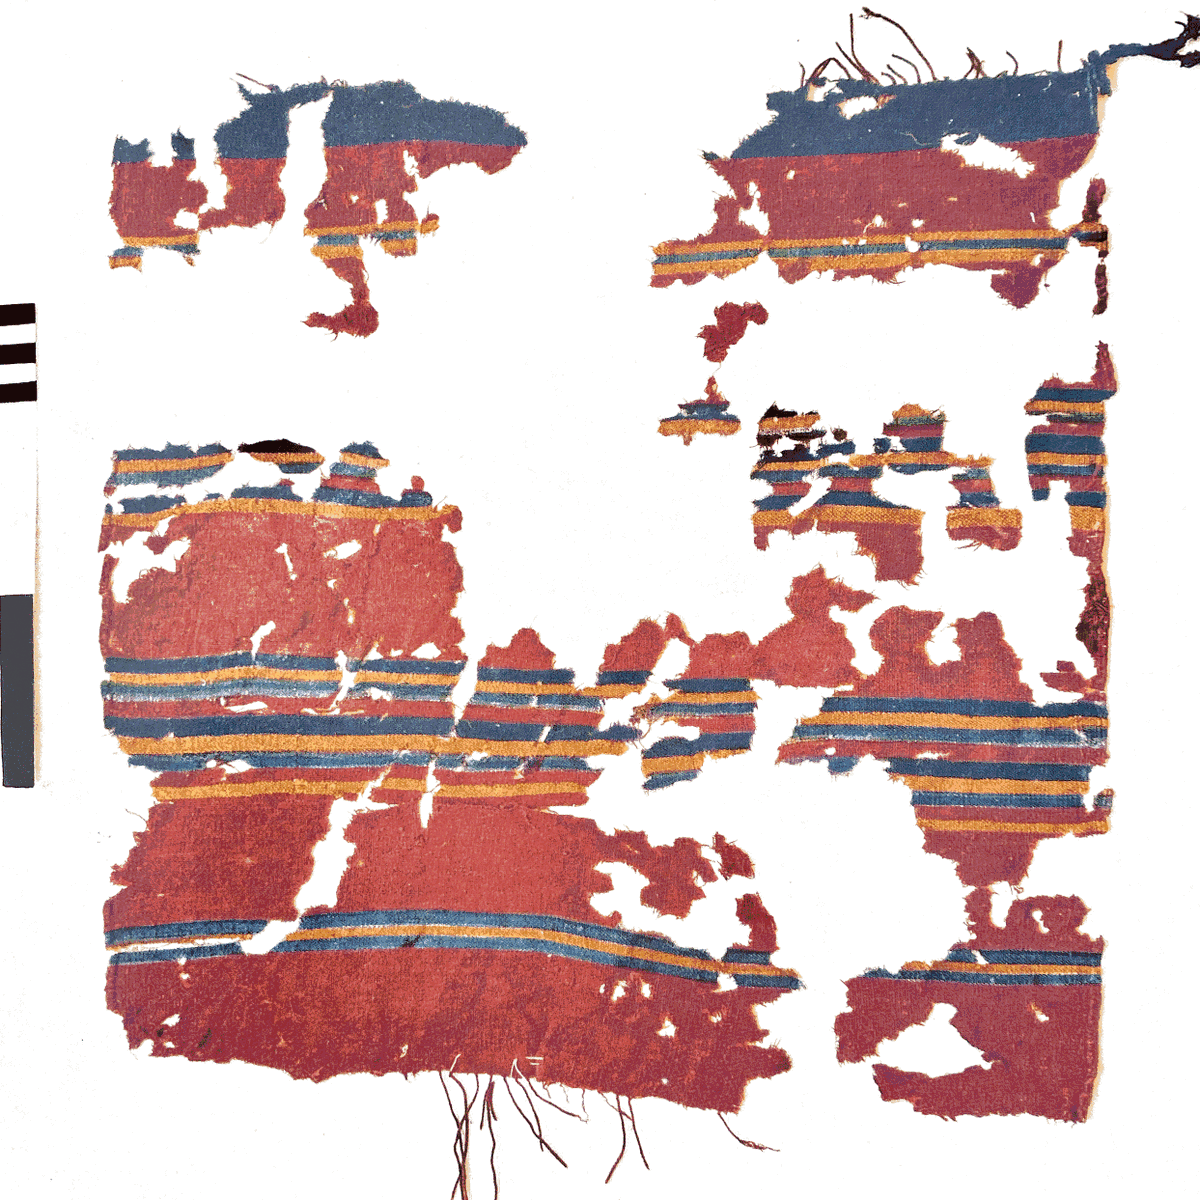  @LloydLlewJ suggests a reddish hue (from saffron), but an attempt to determine the exact shade is likely futile. Yellow stripes can be seen in an early 2nd c. wool spread (poss. a scroll wrapper) from Israel. But whether this would've been referred to as 'yellow'... 3/